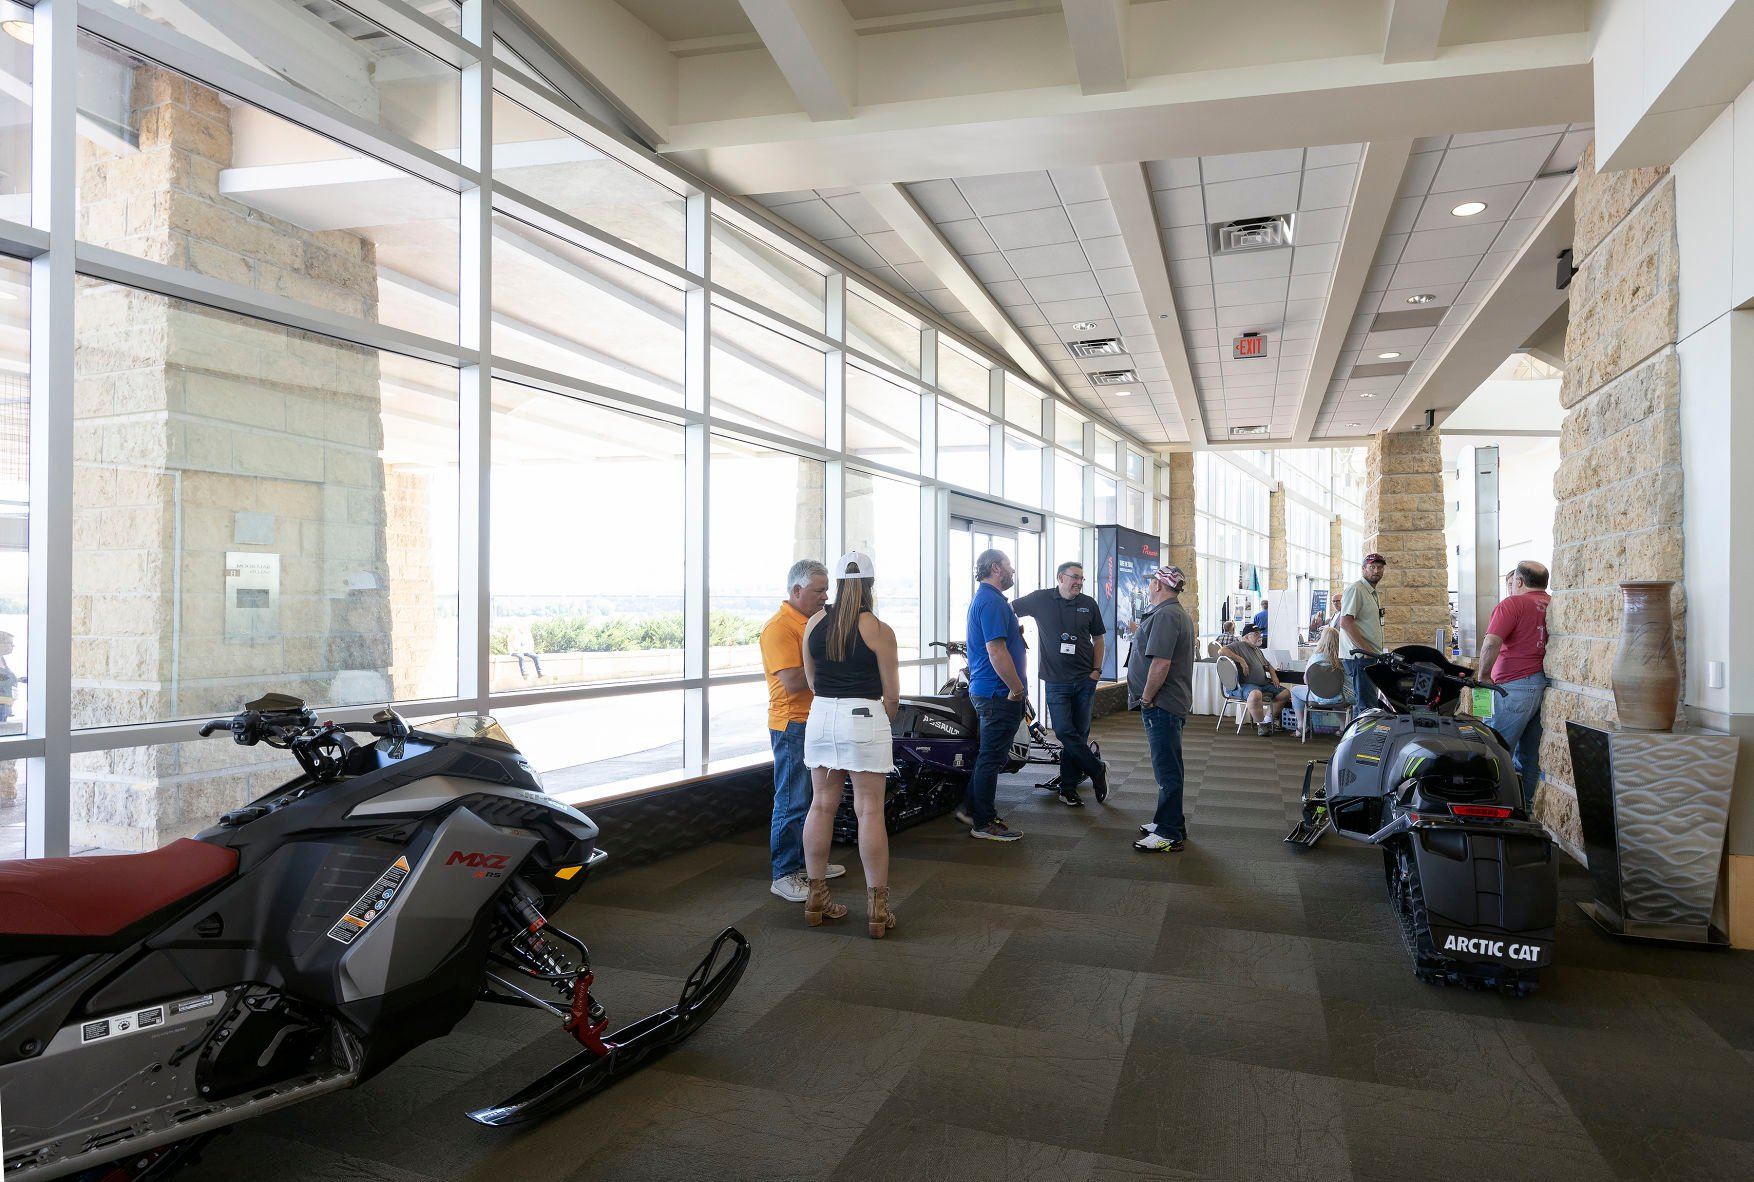 Visitors gather at Grand River Center in Dubuque on Thursday for the International Snowmobile Congress. The event concludes today.    PHOTO CREDIT: Stephen Gassman